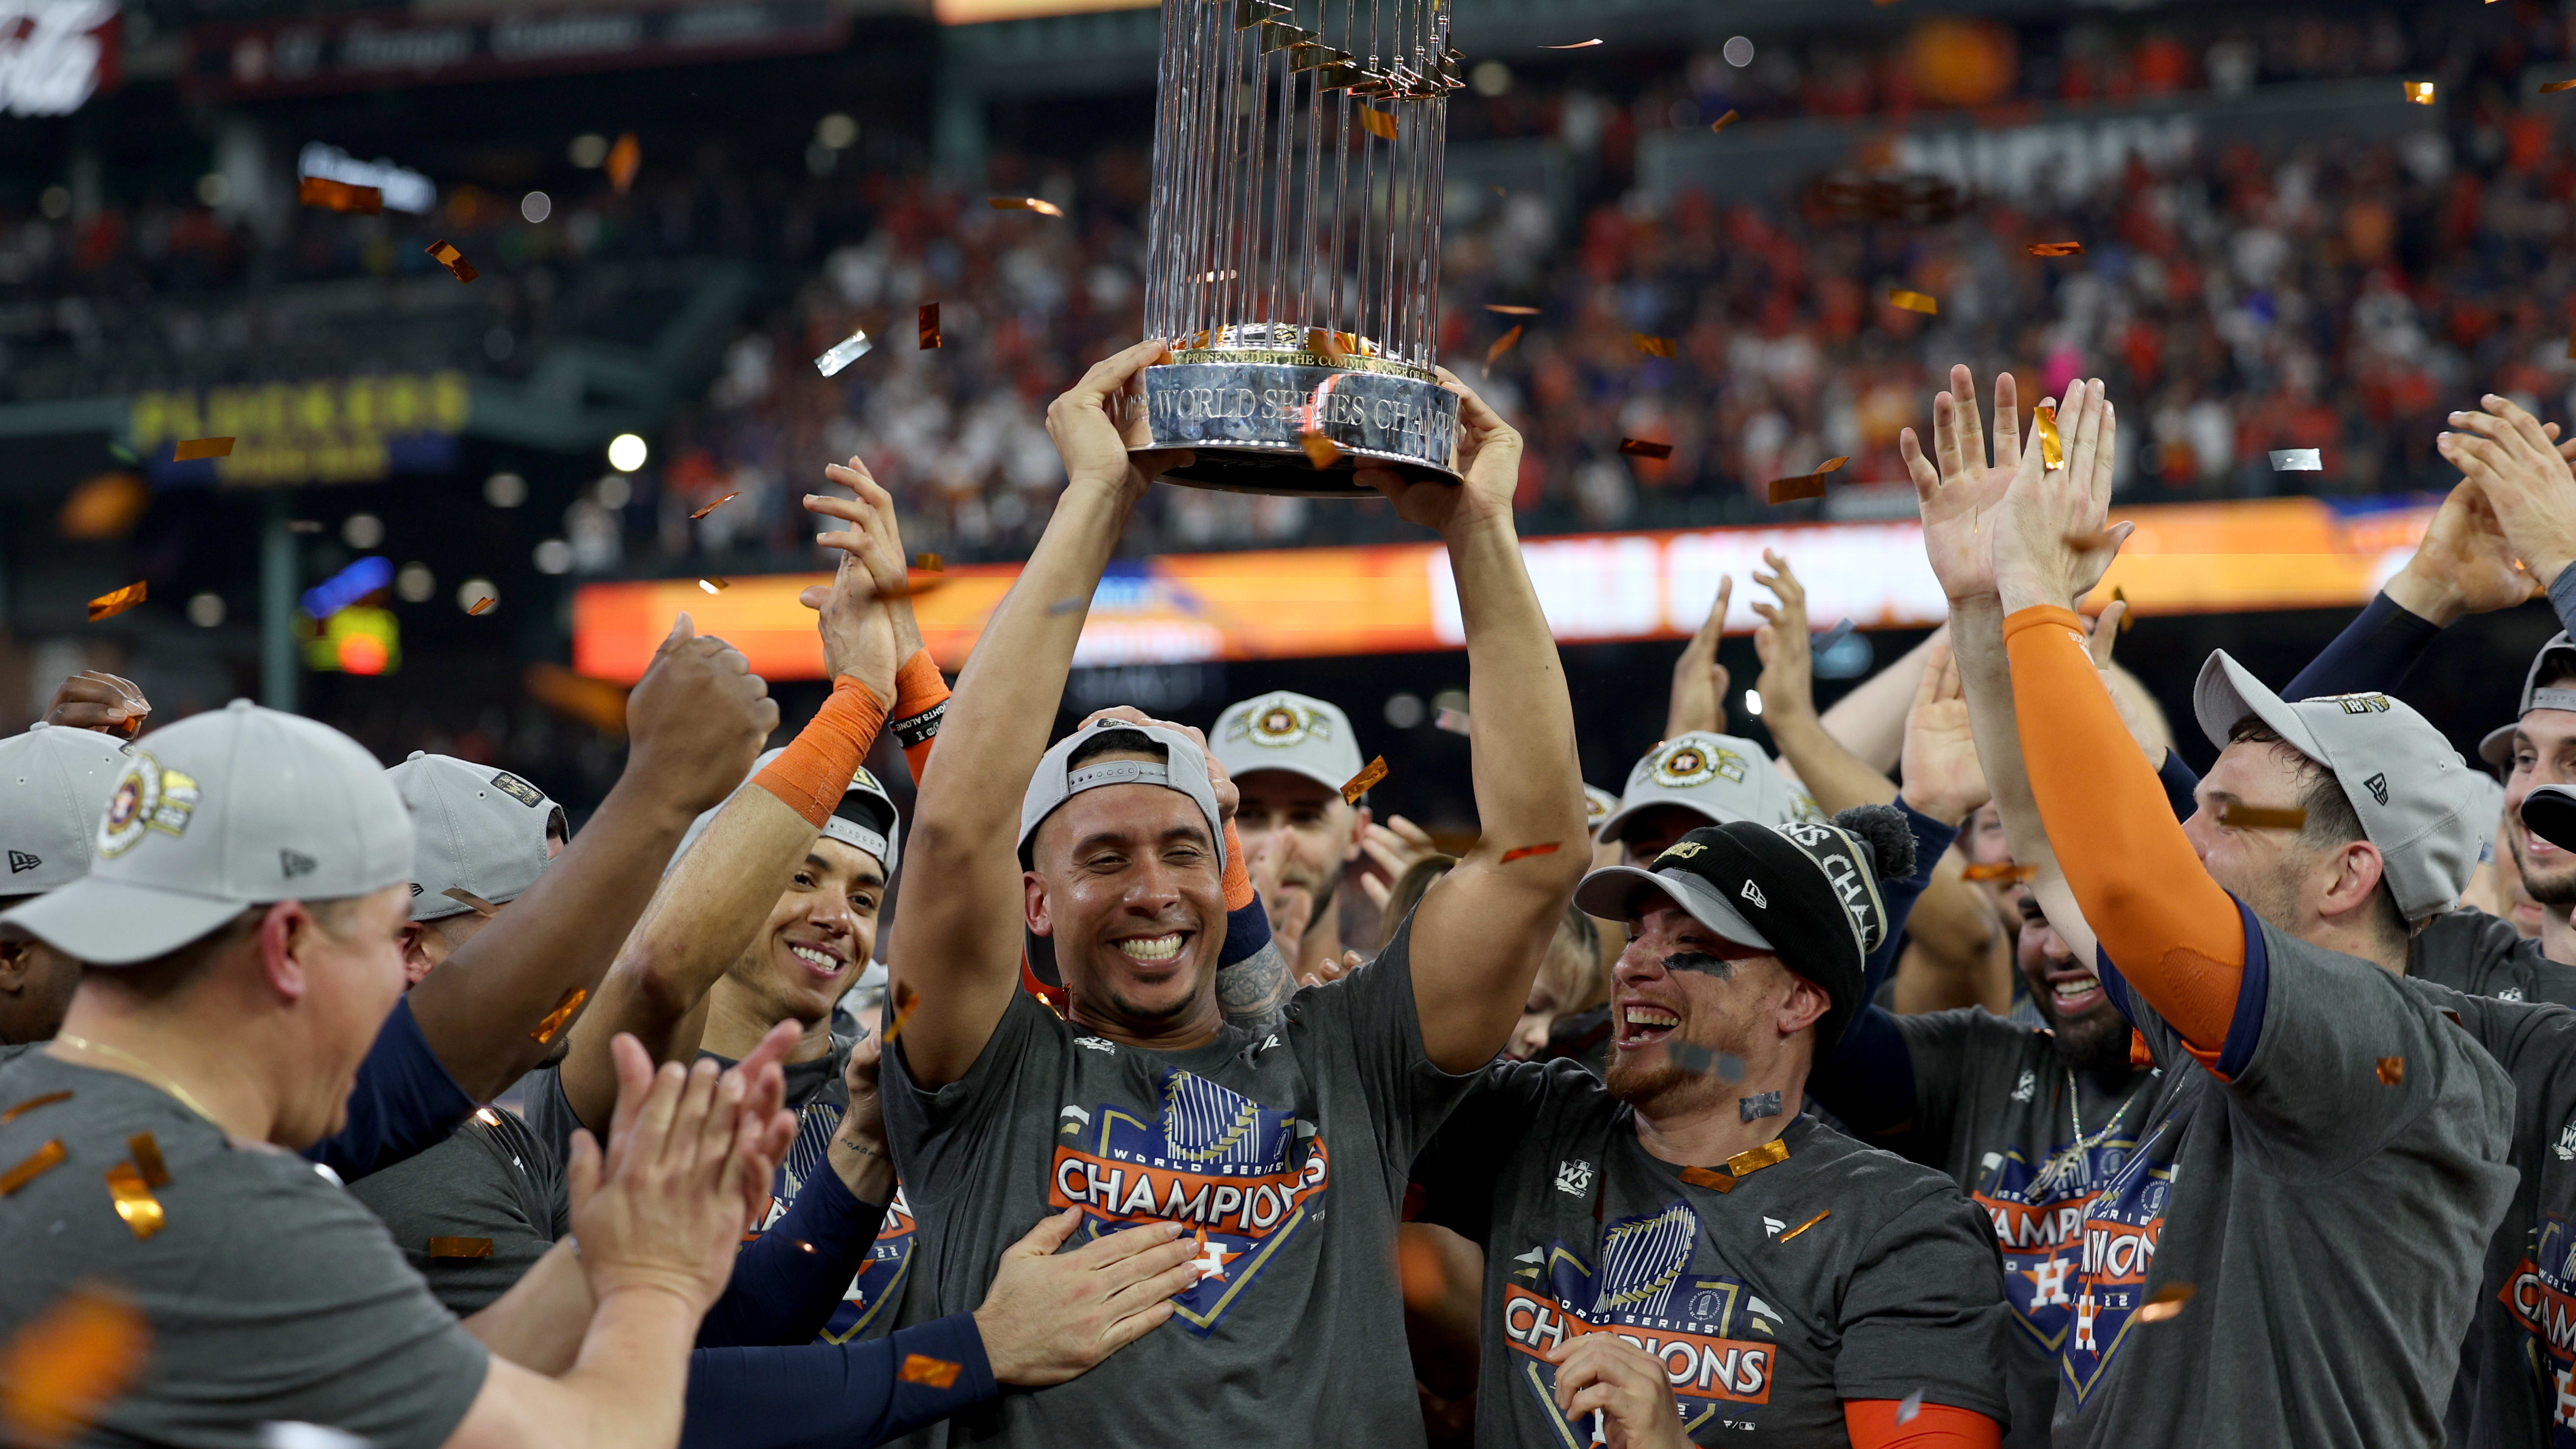 Michael Brantley lifts the World Series trophy